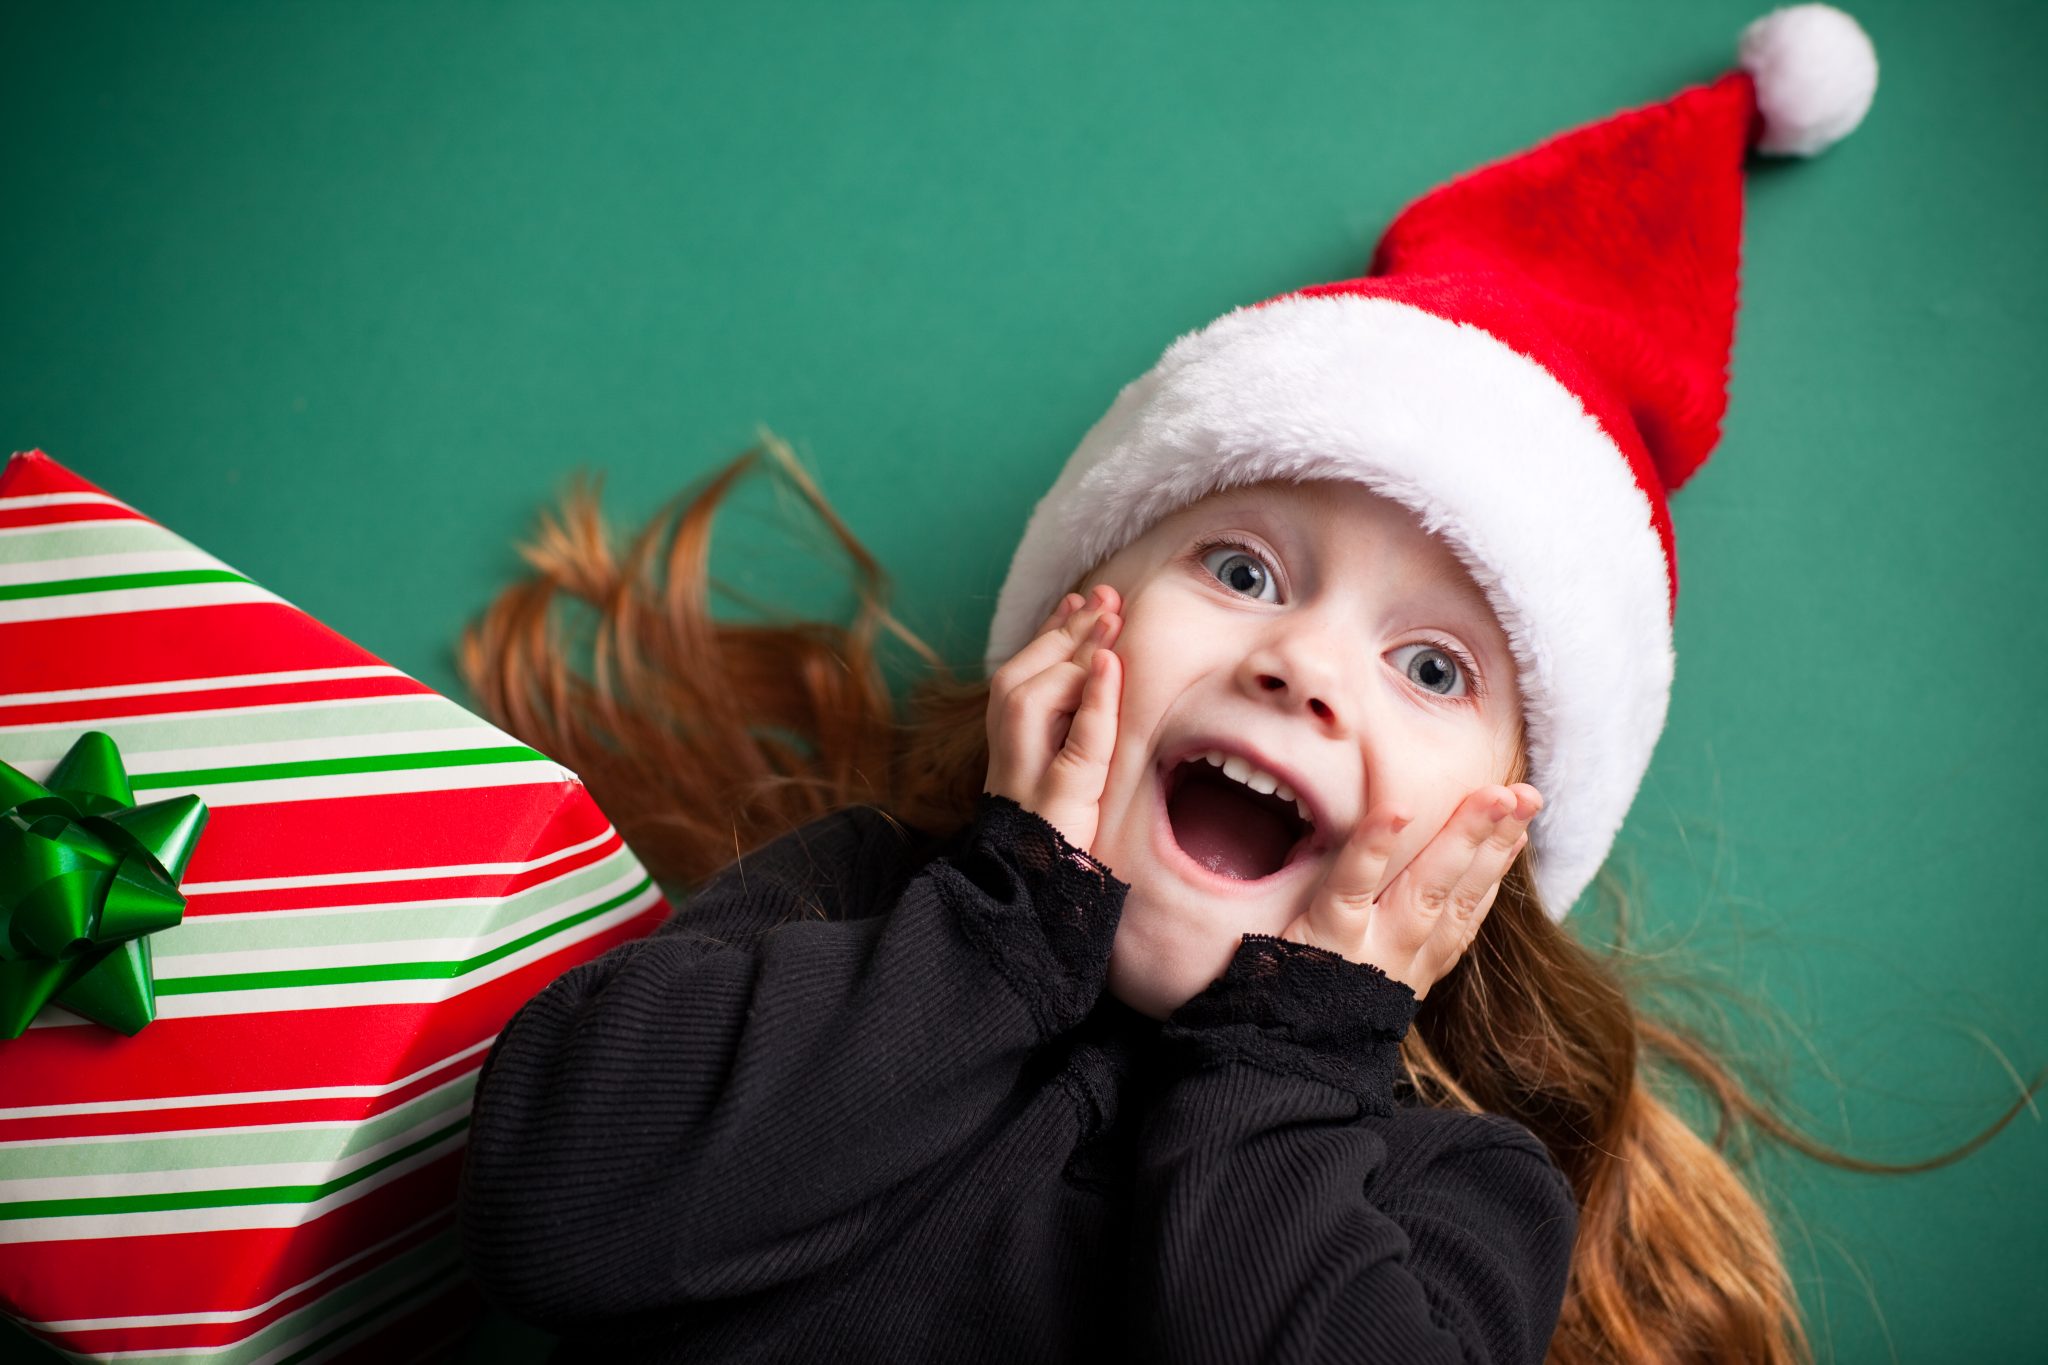 We love it – mum shares hack on getting kids to behave coming up to Christmas